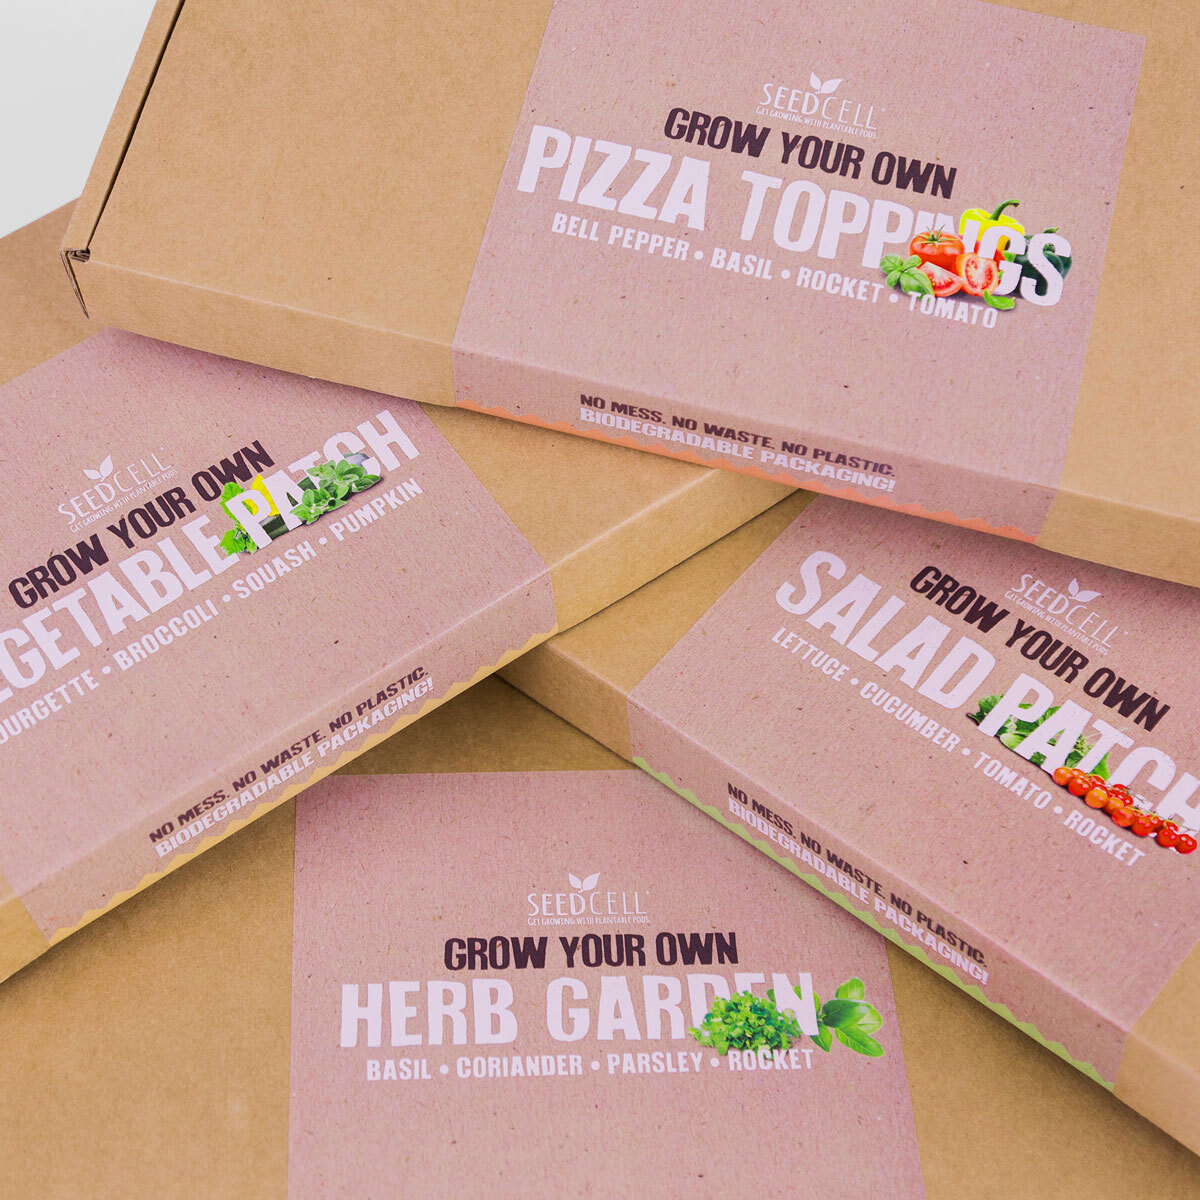 Seedcell Grow your Own Vegetable and Salad Patch, Herb Garden and Pizza Toppings